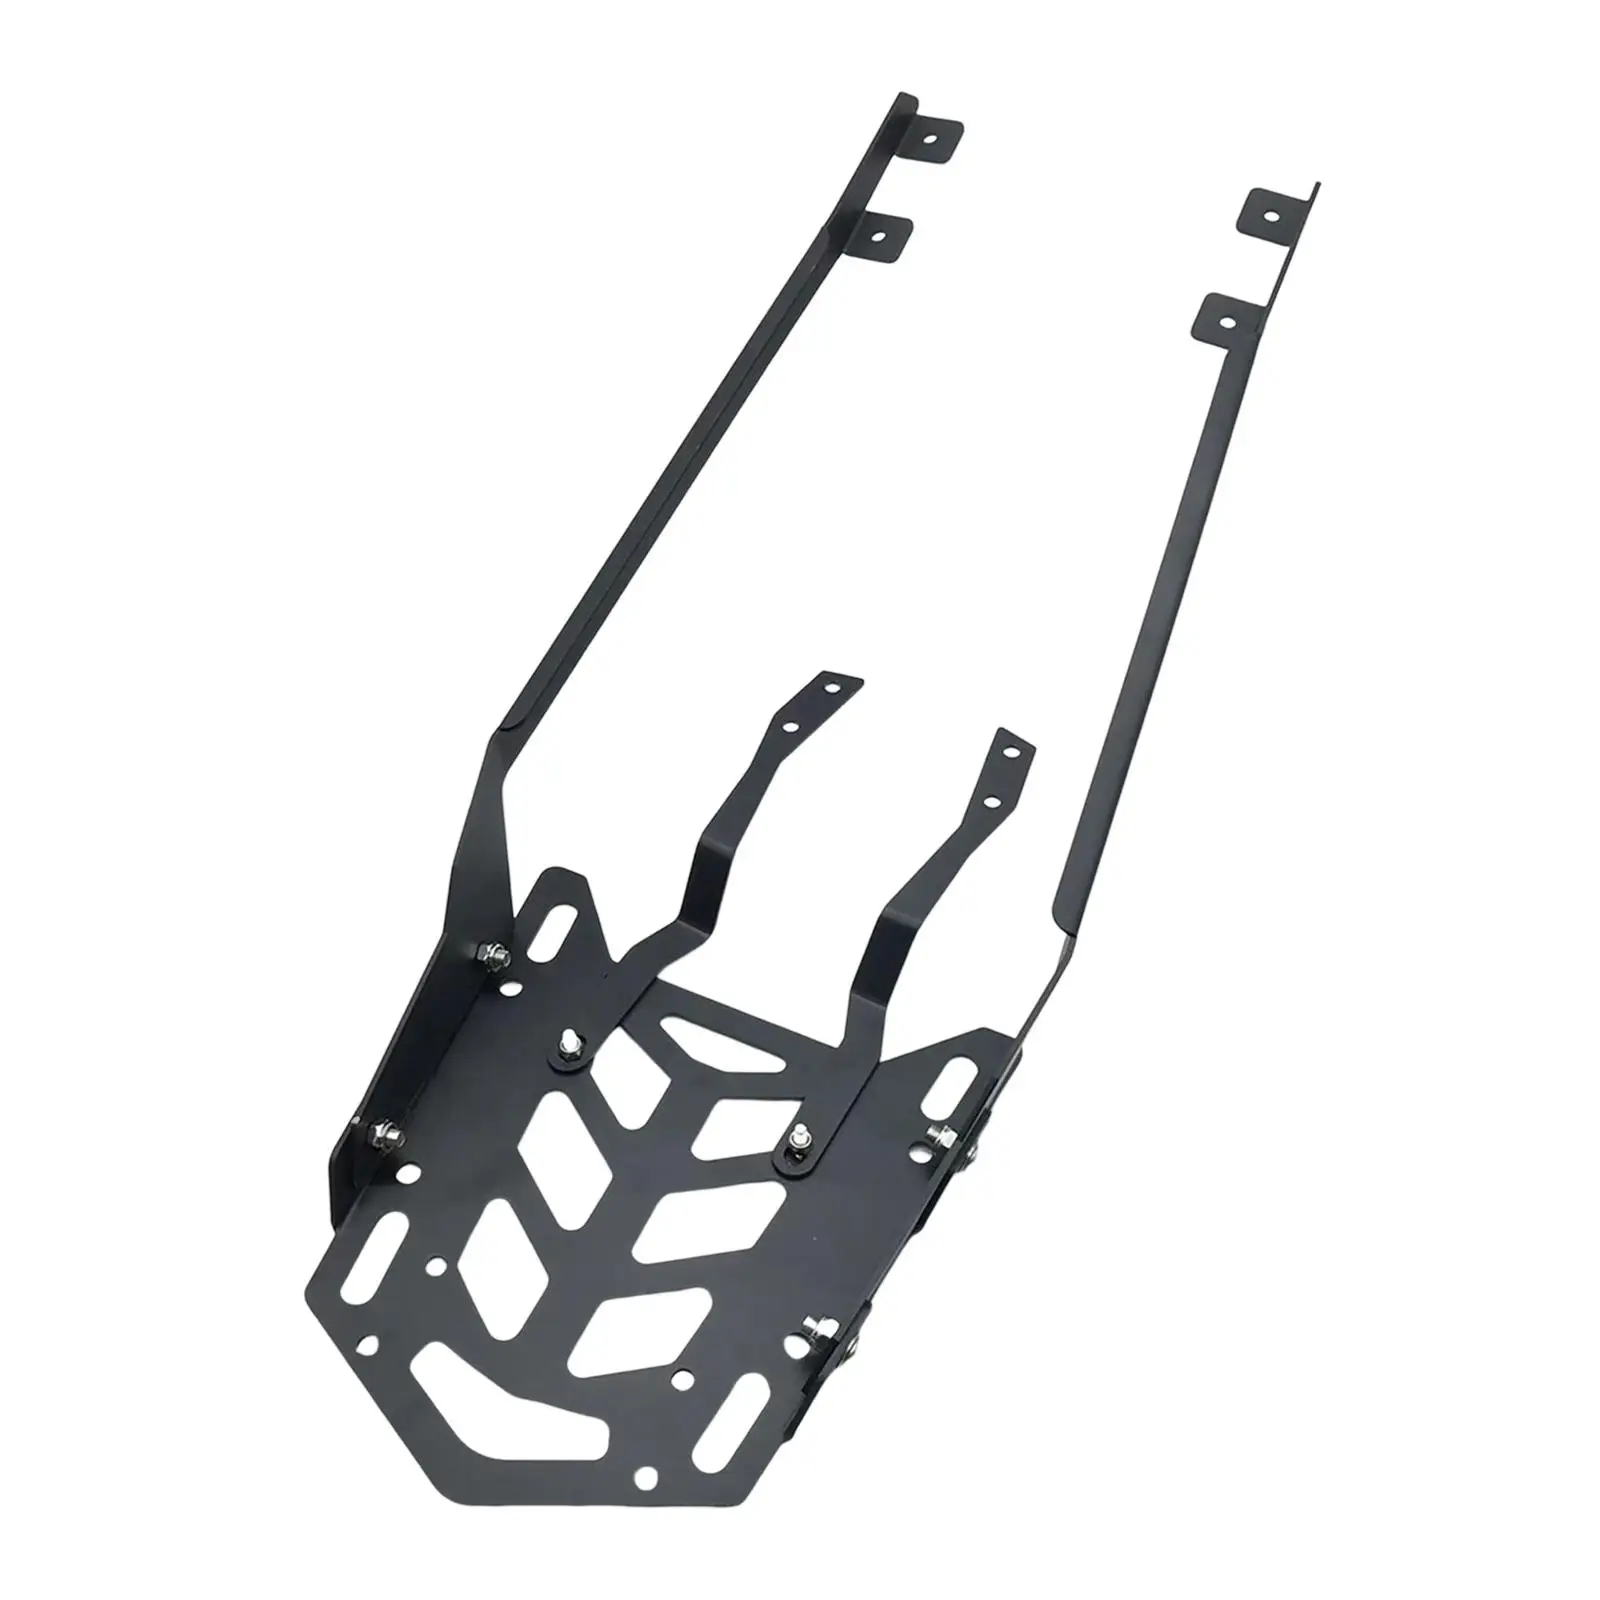 

Motorbike Rear Luggage Rack Carrier Iron for Yamaha MT-15 Replace High Quality